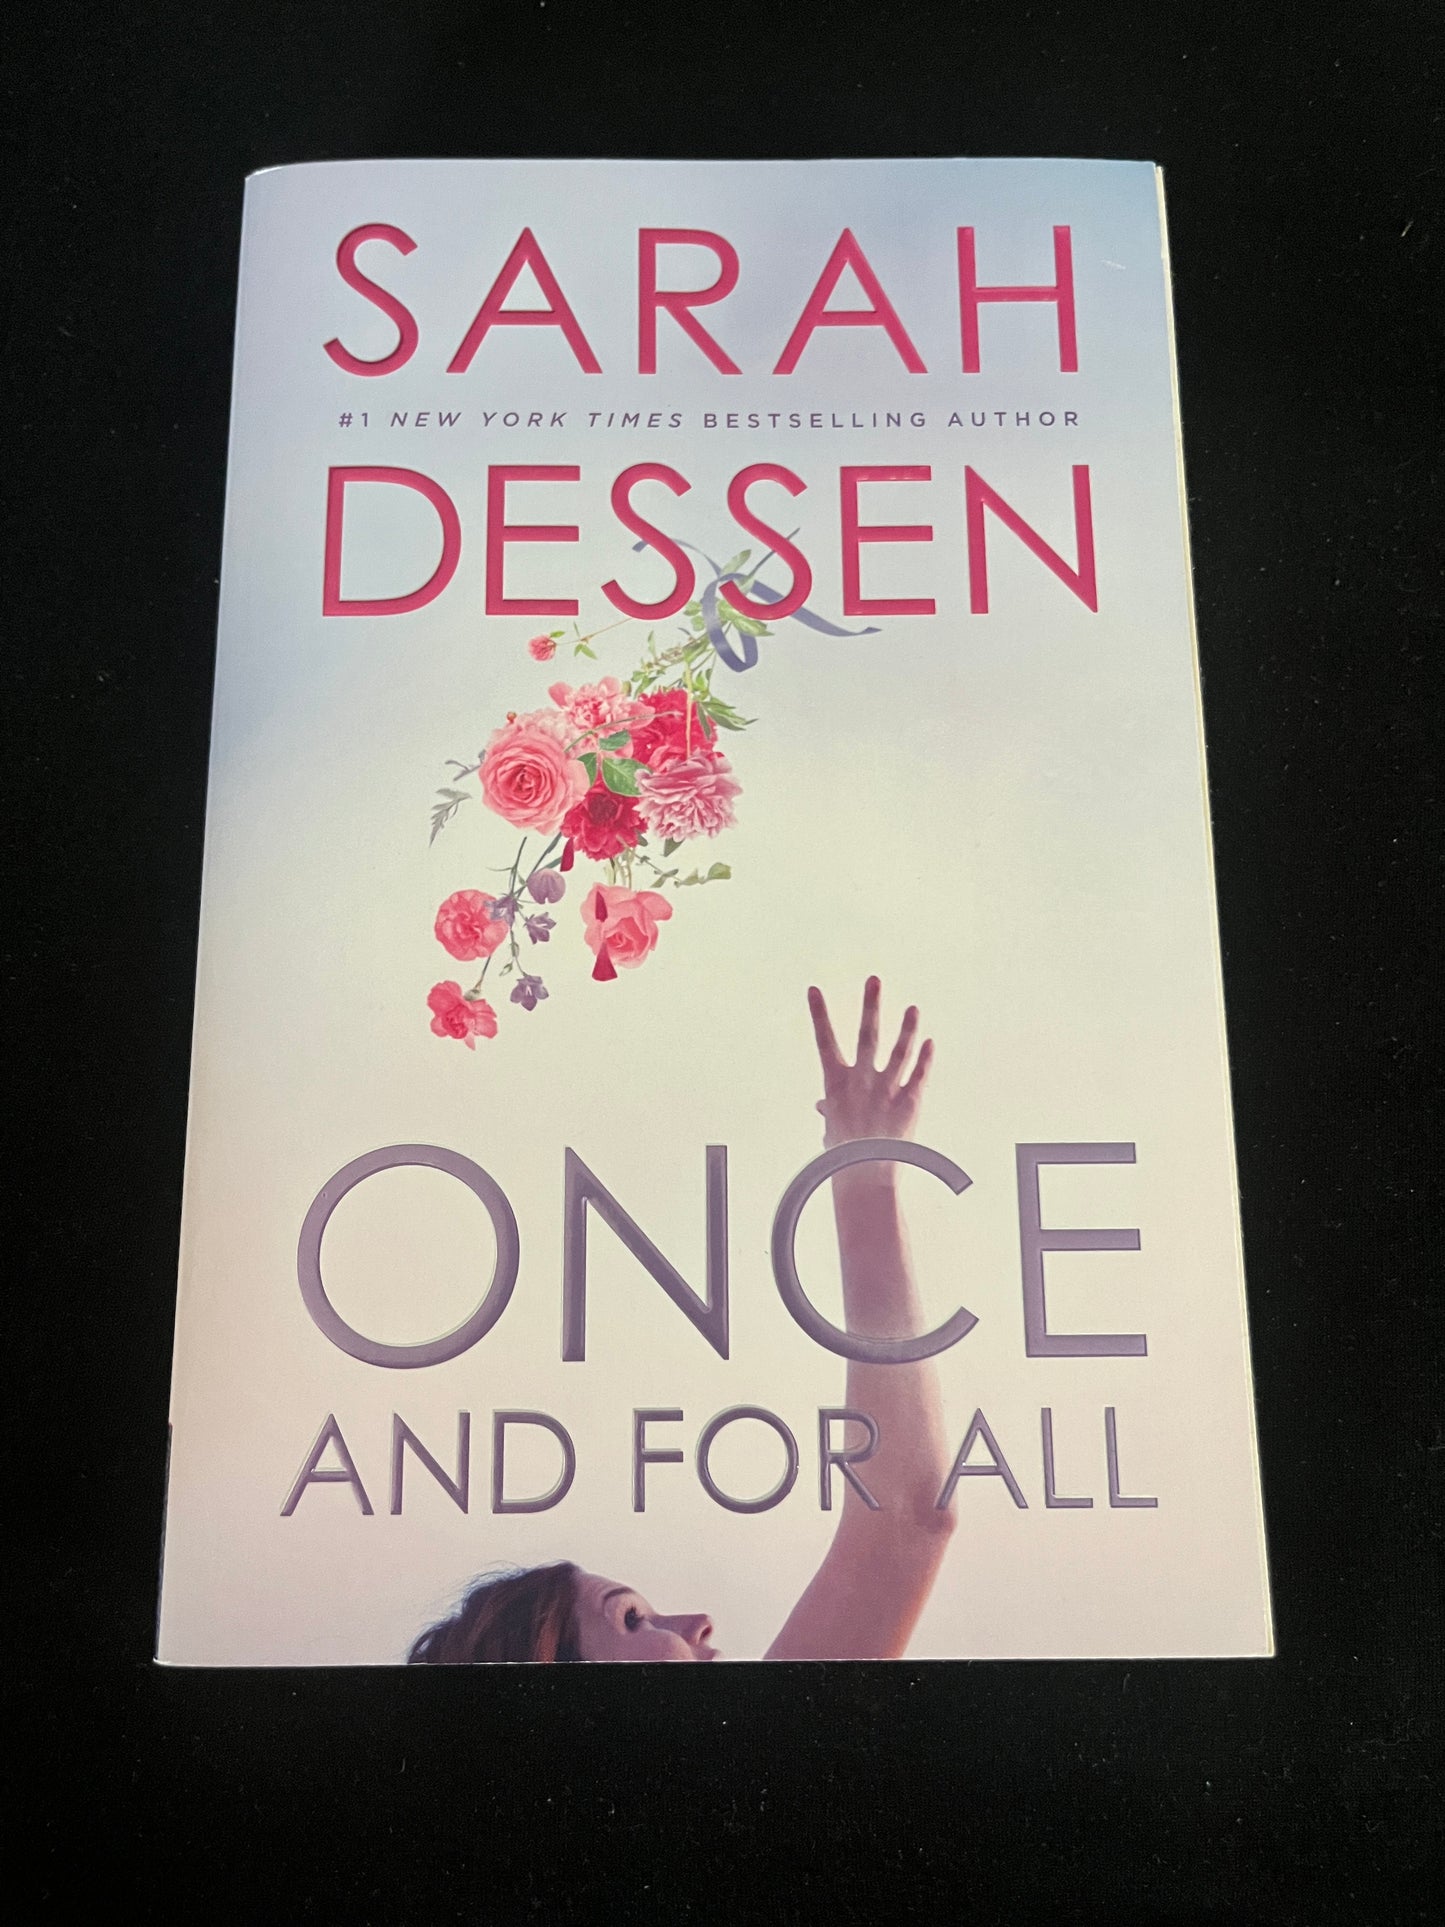 ONCE AND FOR ALL by Sarah Dessen